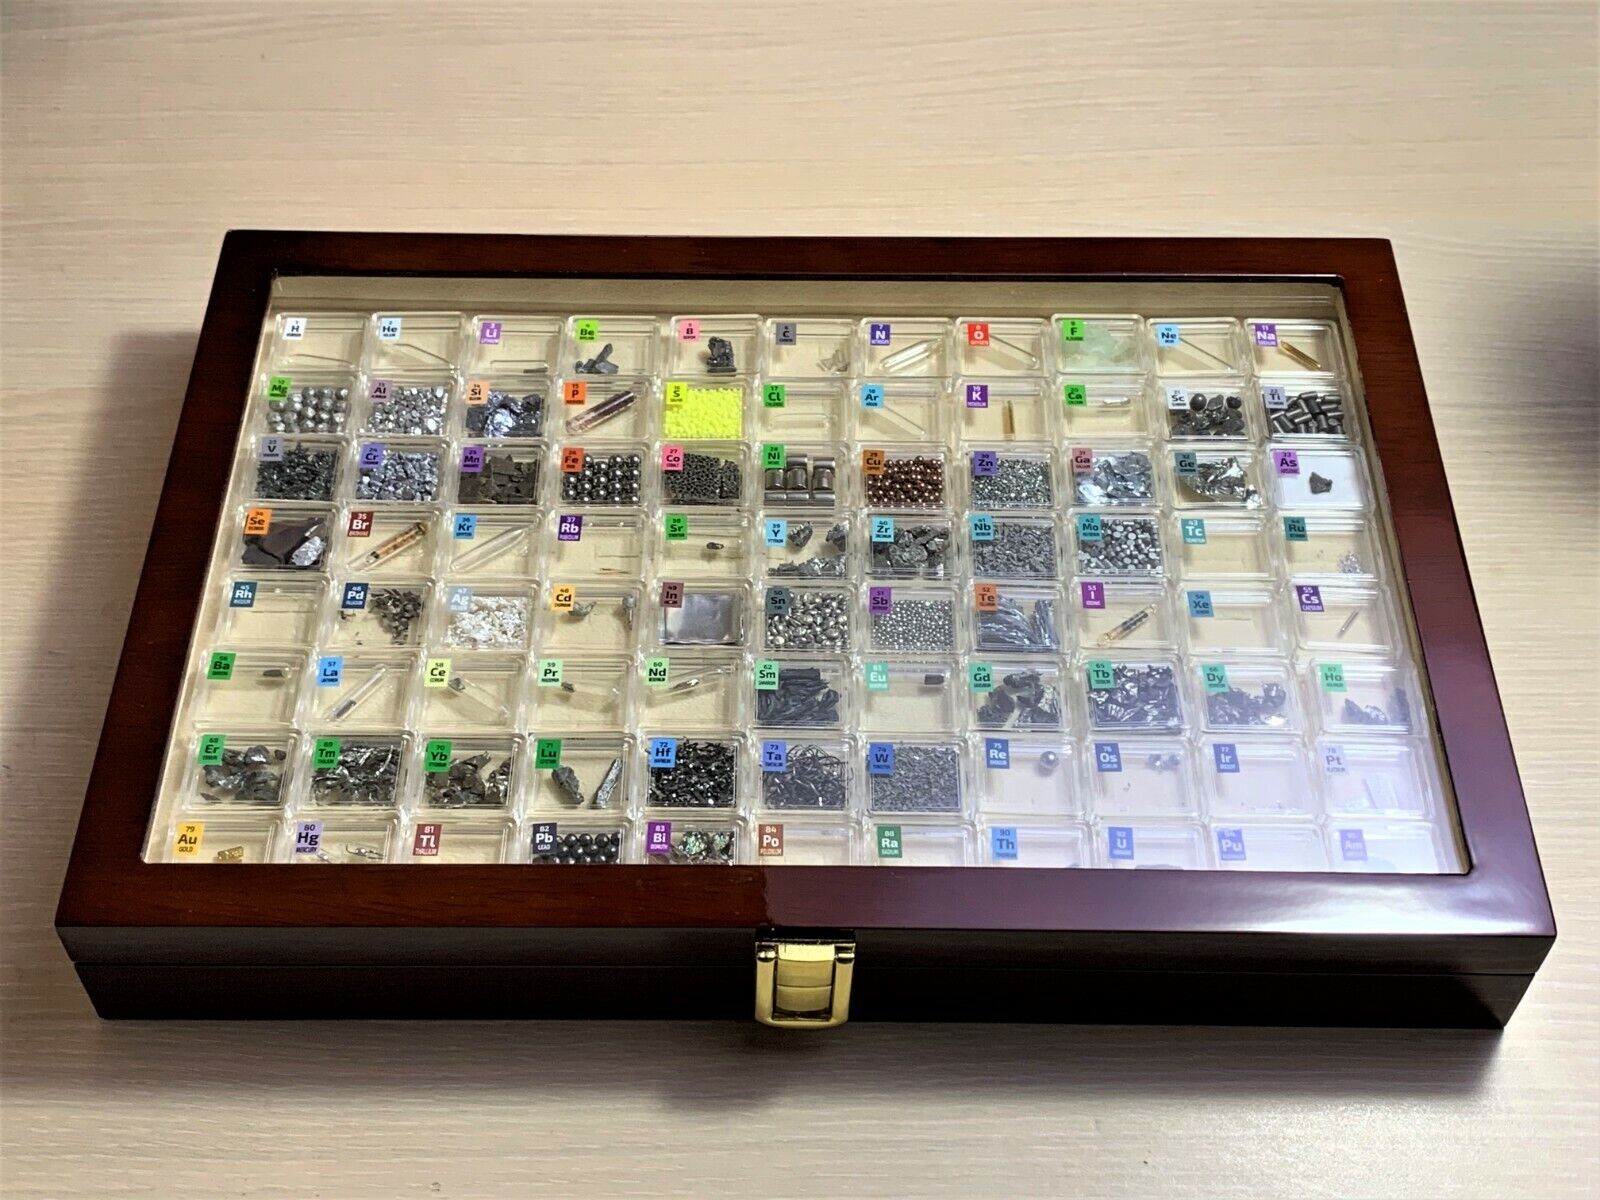 82 periodic table Element Tile Samples in Luxury Wooden Display